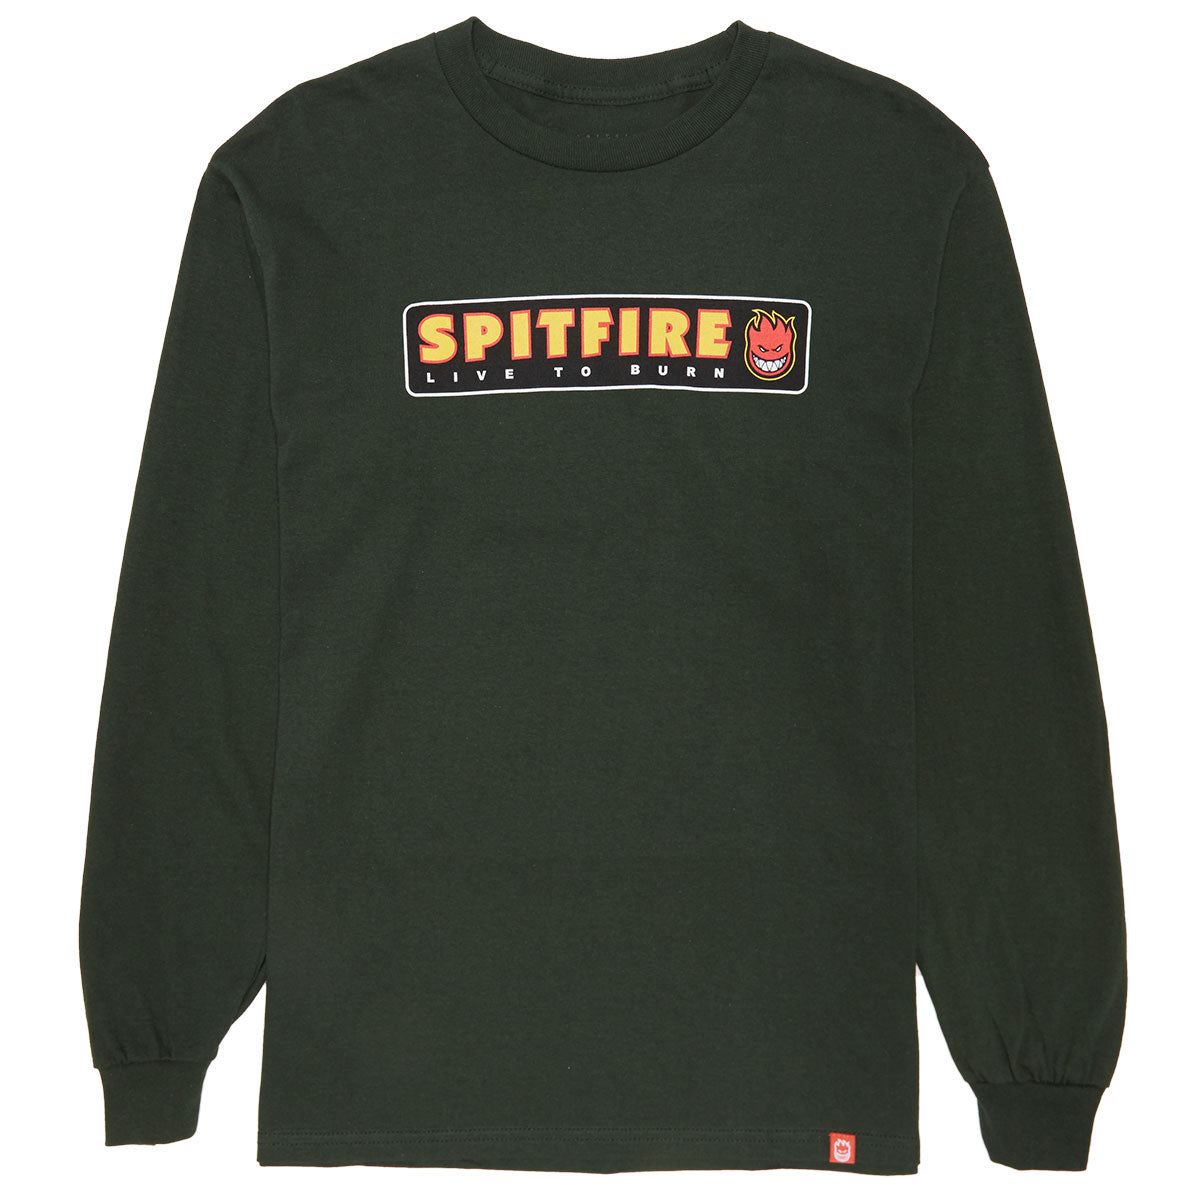 Spitfire Ltb Long Sleeve T-Shirt - Forest Green/Multi Color image 1